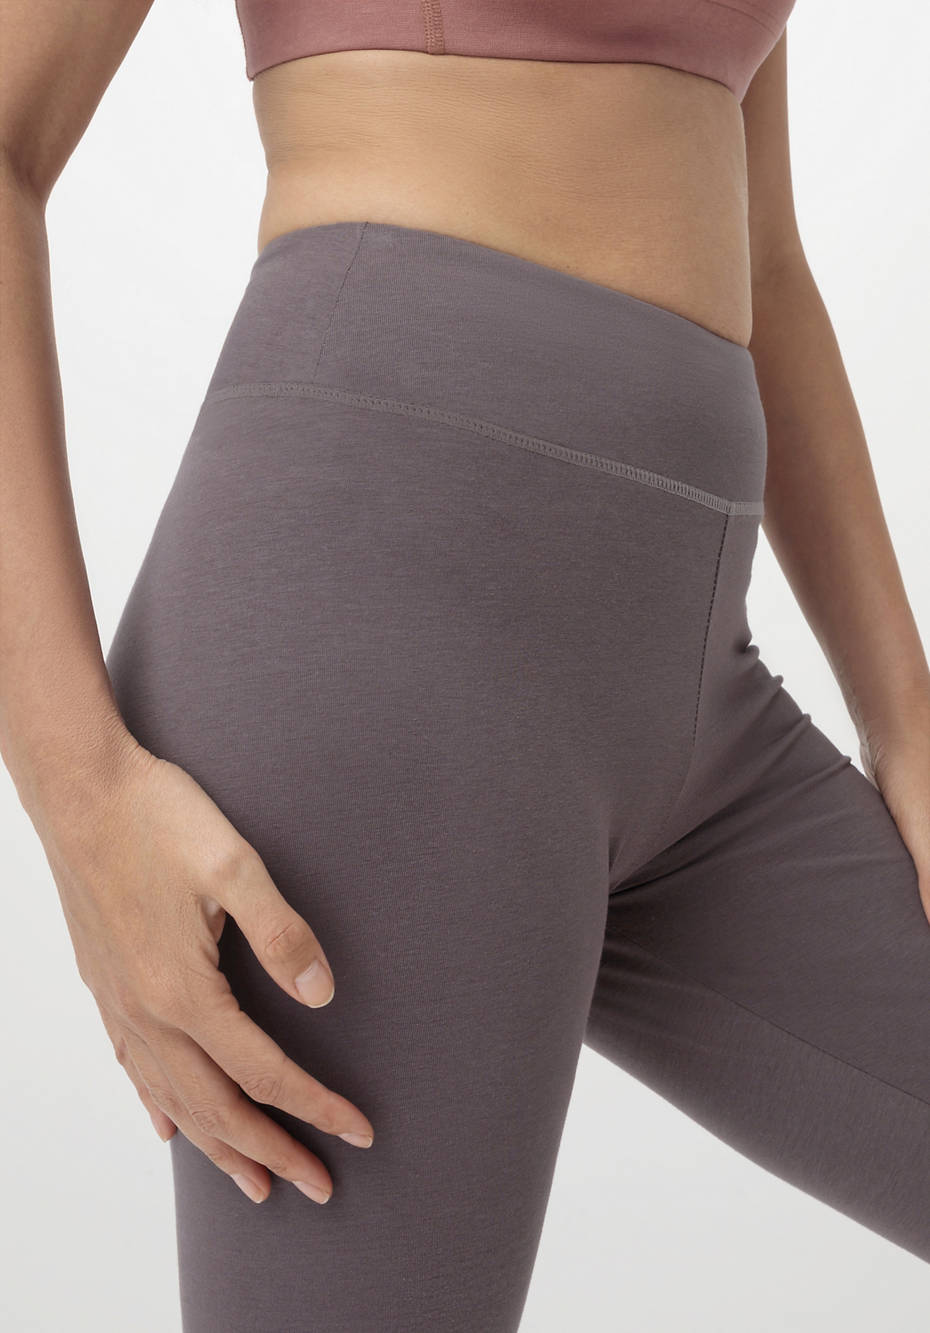 https://imgs7.hessnatur.com/is/image/HessNatur/hyb_redes_detail_main/Leggings_Fitted_Medium_Cut_ACTIVE_LIGHT_made_of_organic_cotton-54754_66_4.jpg